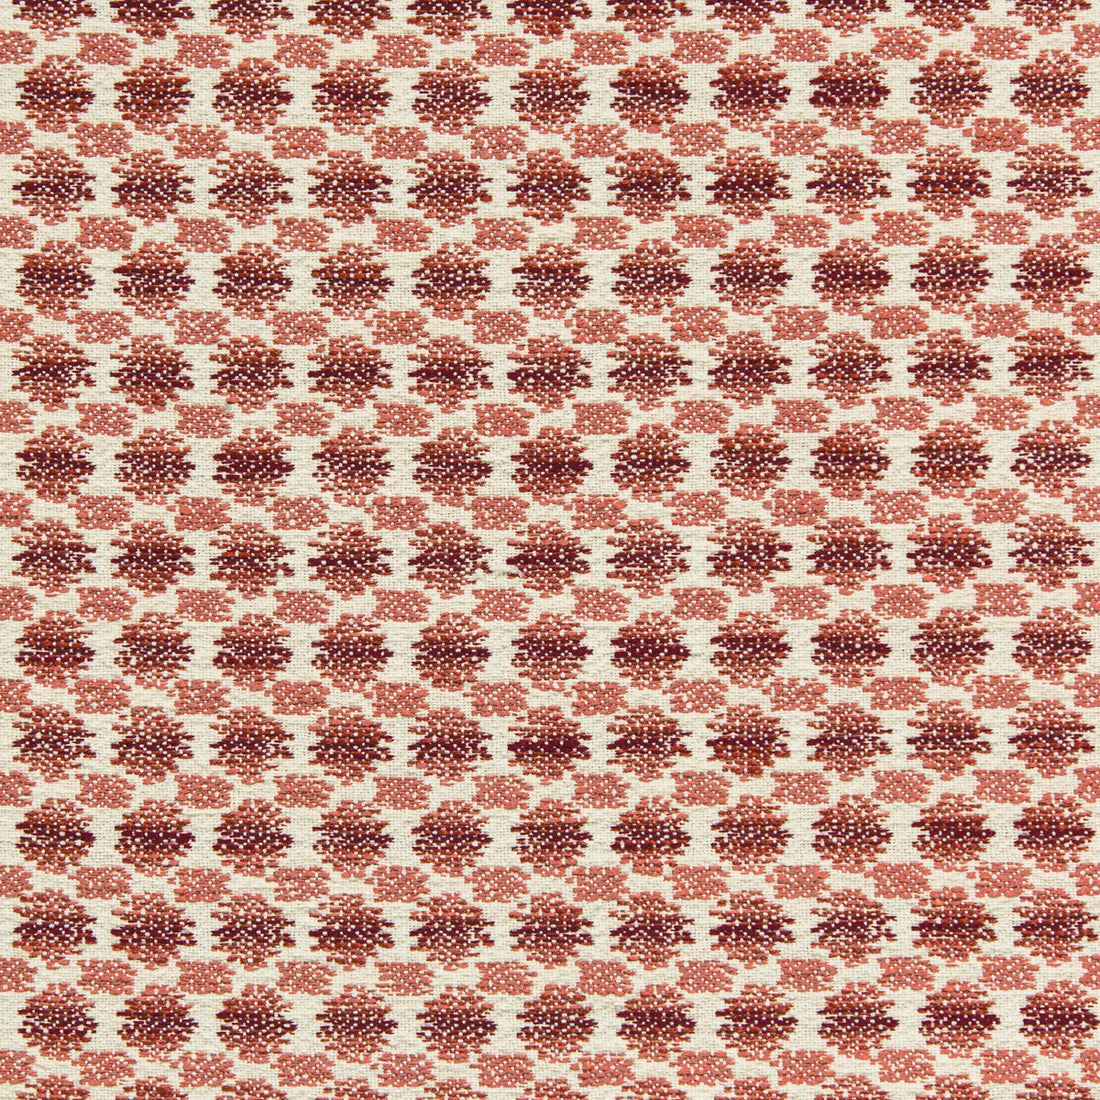 Lancing Weave fabric in berry color - pattern 2020100.97.0 - by Lee Jofa in the Linford Weaves collection